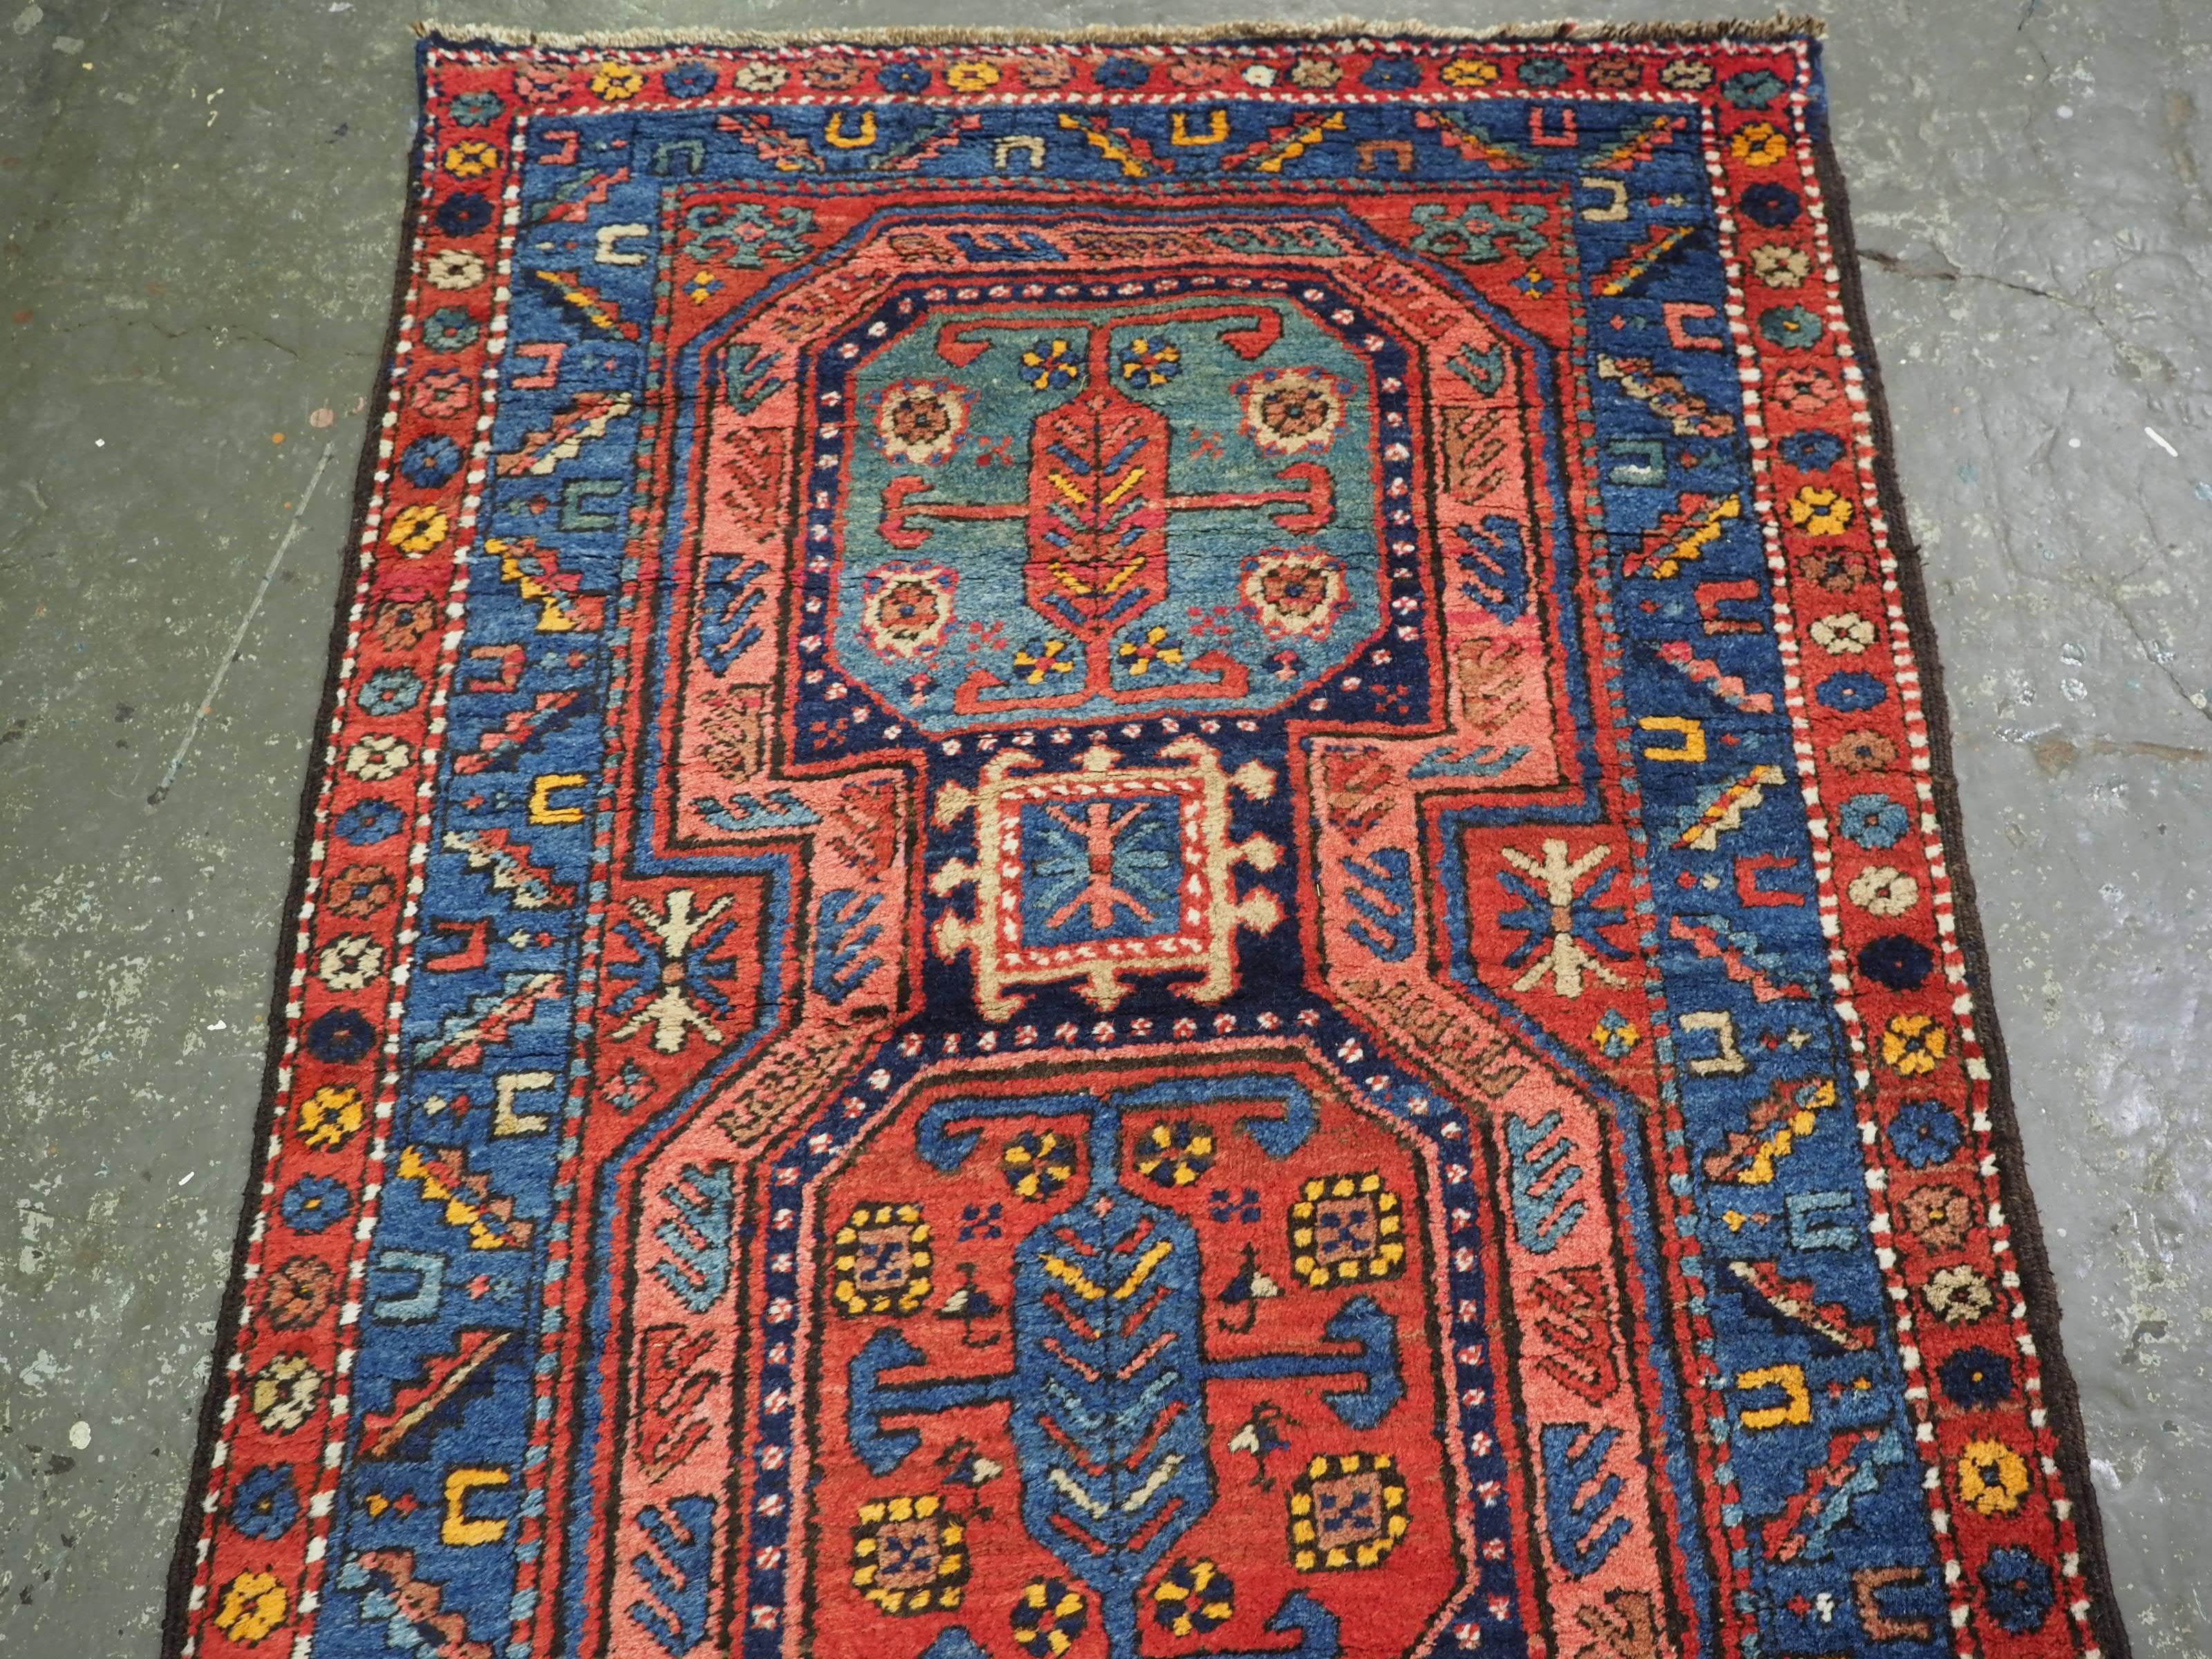 Size: 14ft 4in x 3ft 4in (438 x 102cm).

Antique South Caucasian or Kurdish runner of superb design and colour.

Circa 1920.

A very good runner with linked octagonal medallions, very similar in design to the well known Caucasian 'Surahani' garden